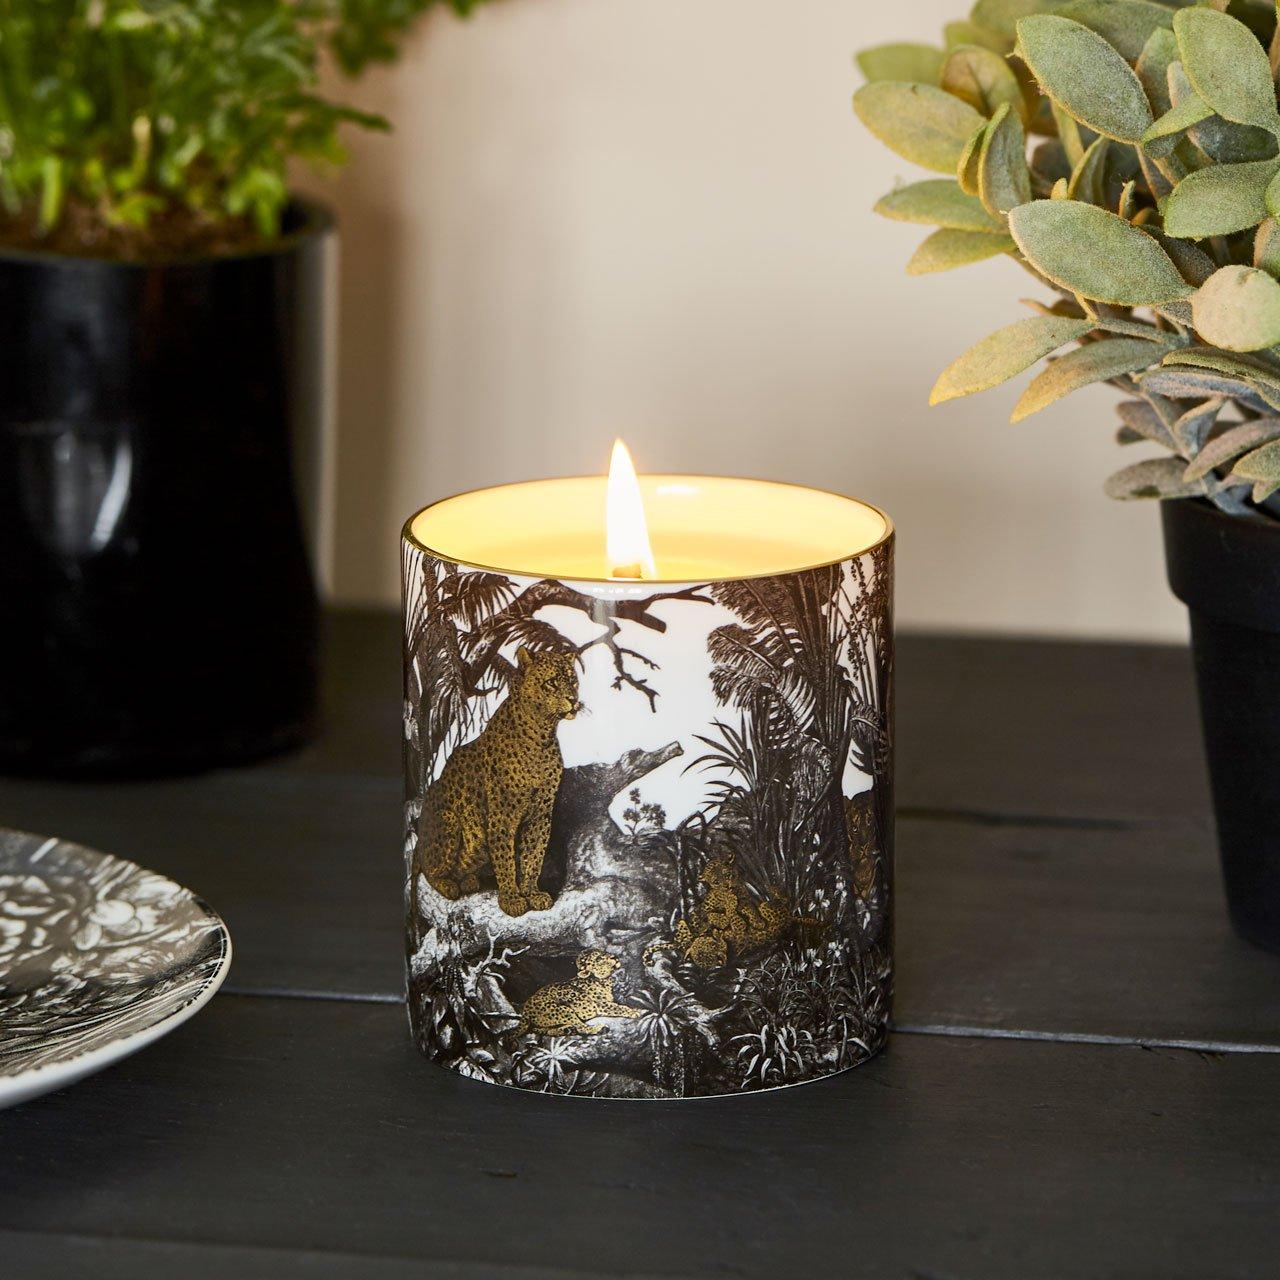 The Jungle Luxury Scented Ceramic Candle - Chase and Wonder - Proudly Made in Britain